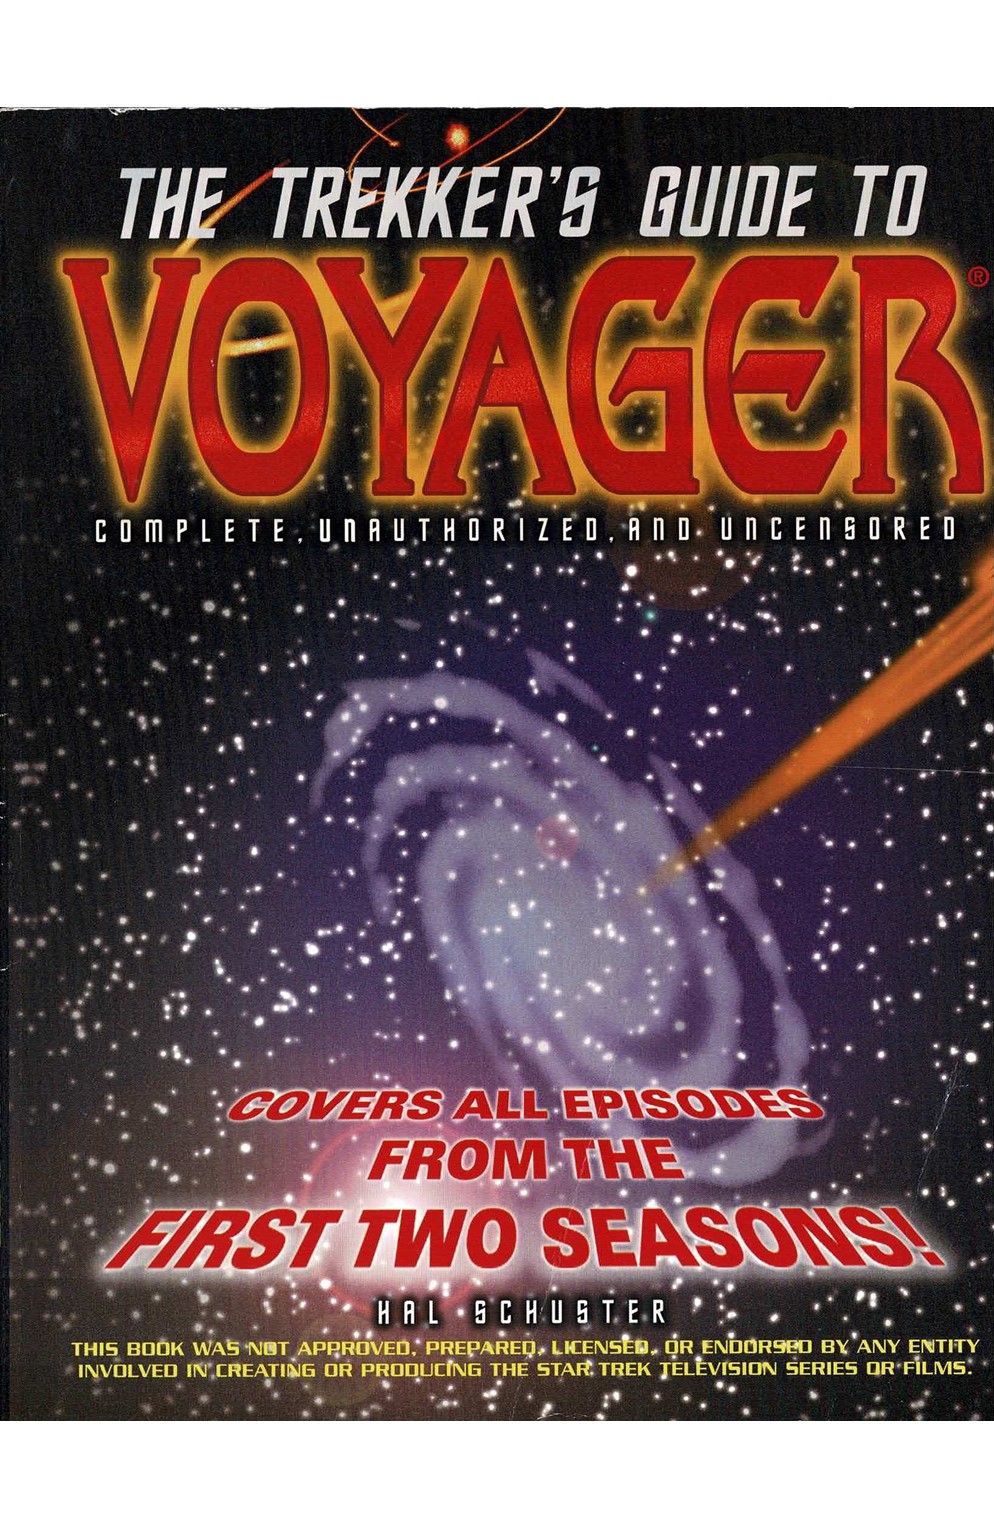 The Trekker's Guide To Voyage Complete Unauthorized And Uncesored